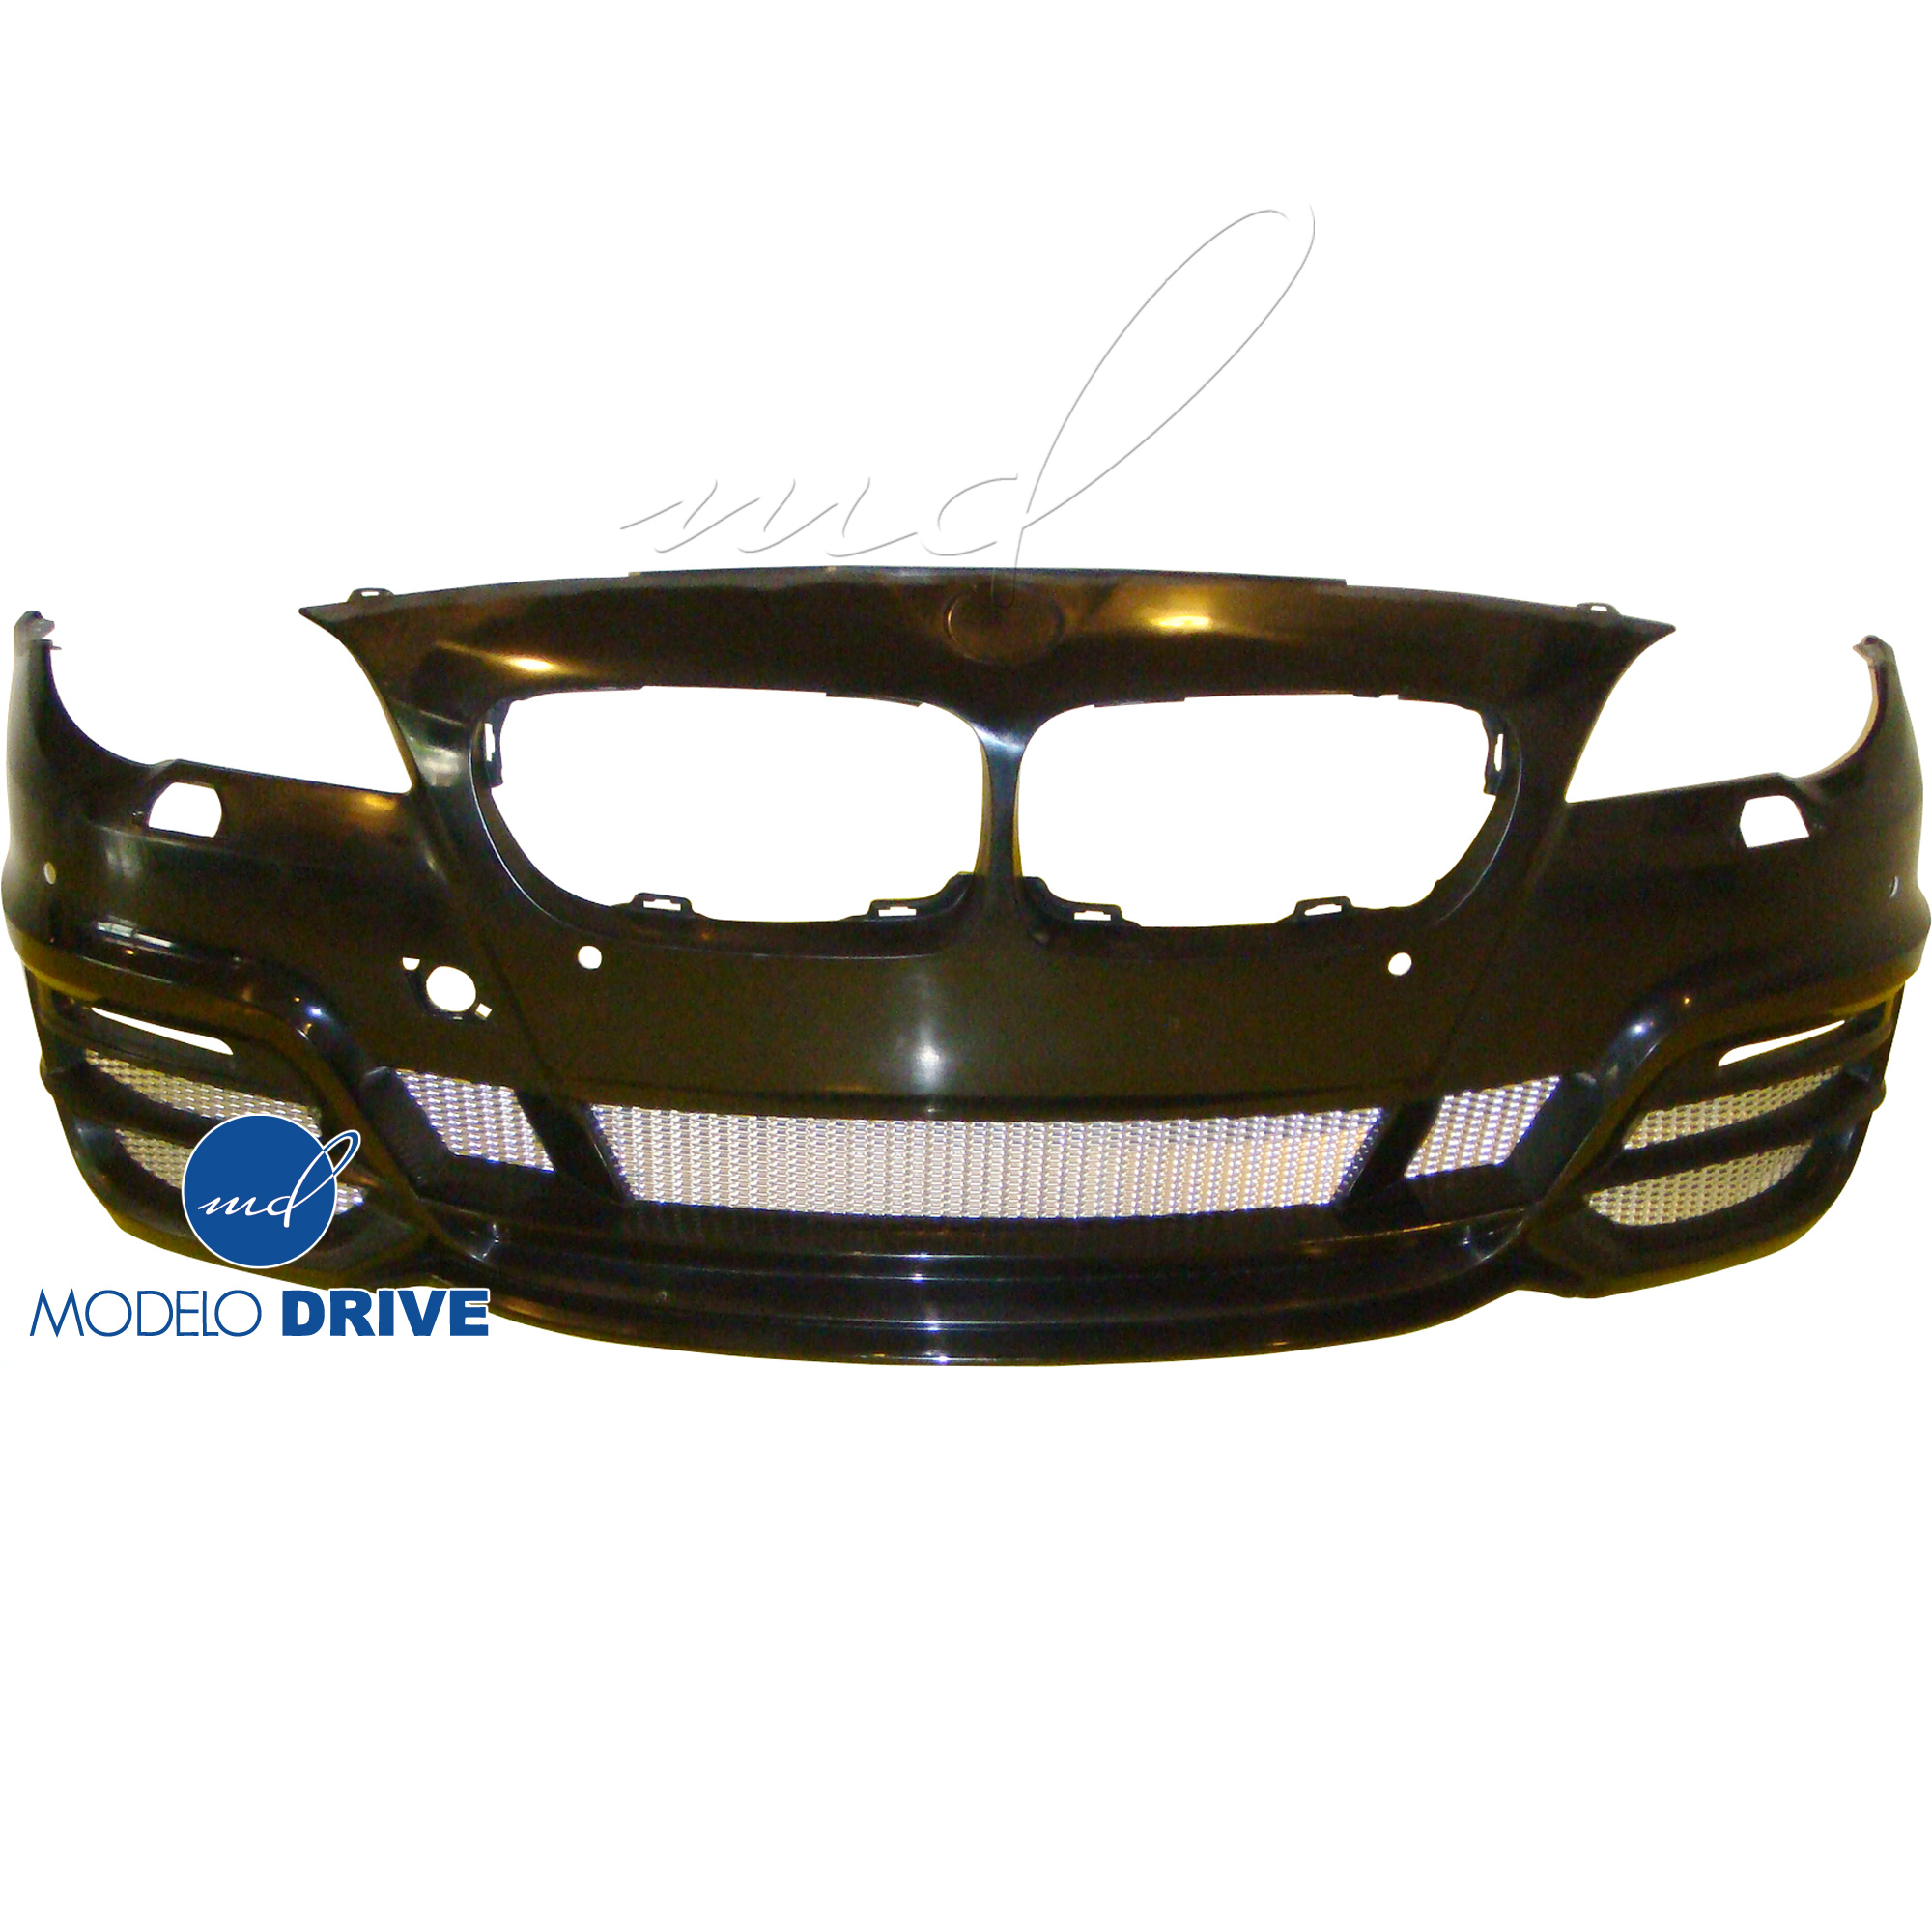 ModeloDrive FRP WAL Front Bumper > BMW 5-Series F10 2011-2016 > 4dr - Image 16